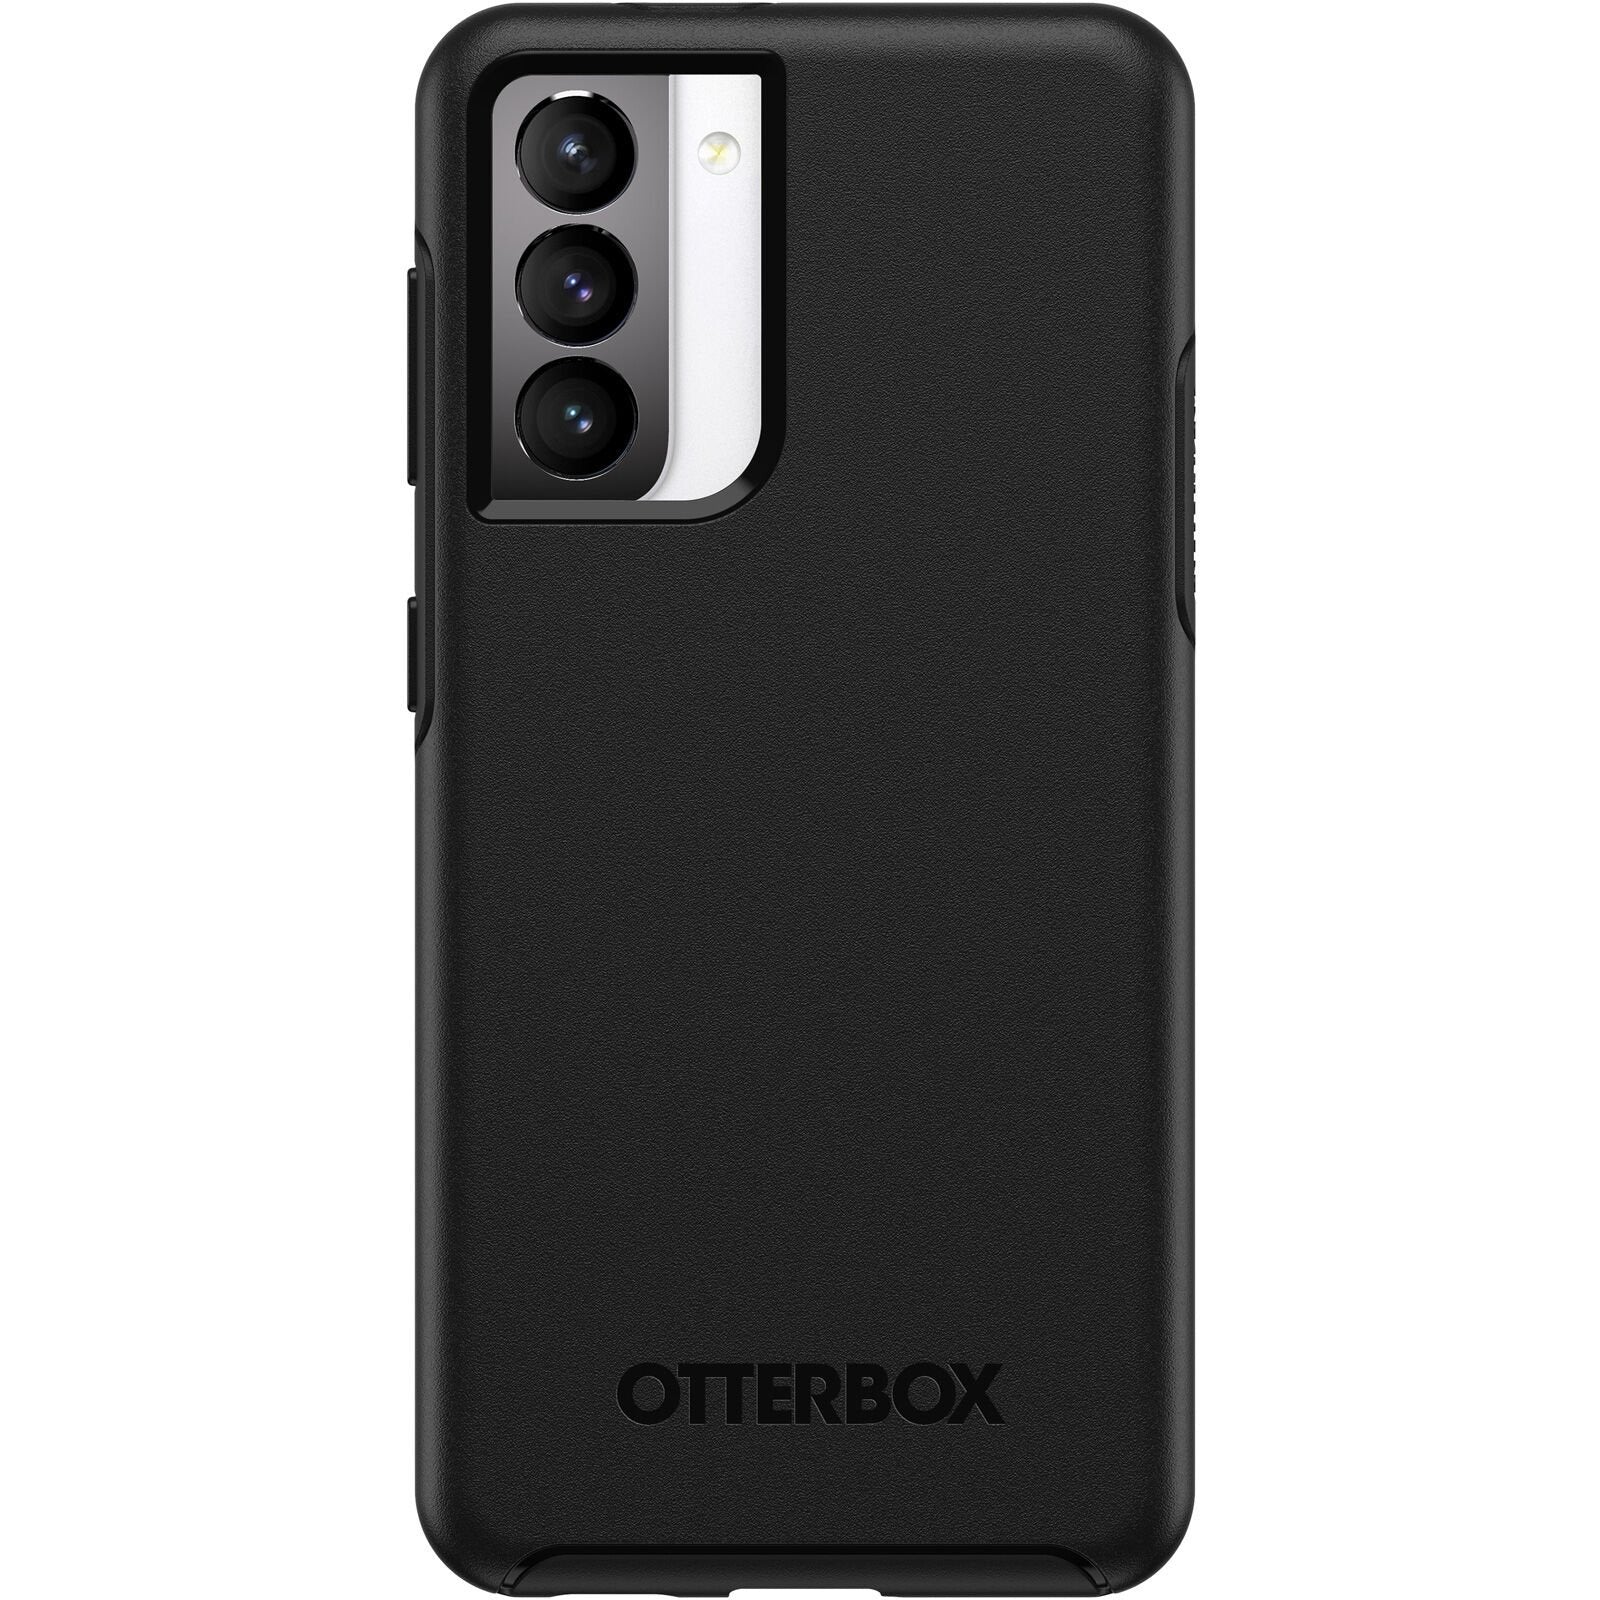 OtterBox SYMMETRY SERIES Case for Samsung Galaxy S21 5G - Black (New)